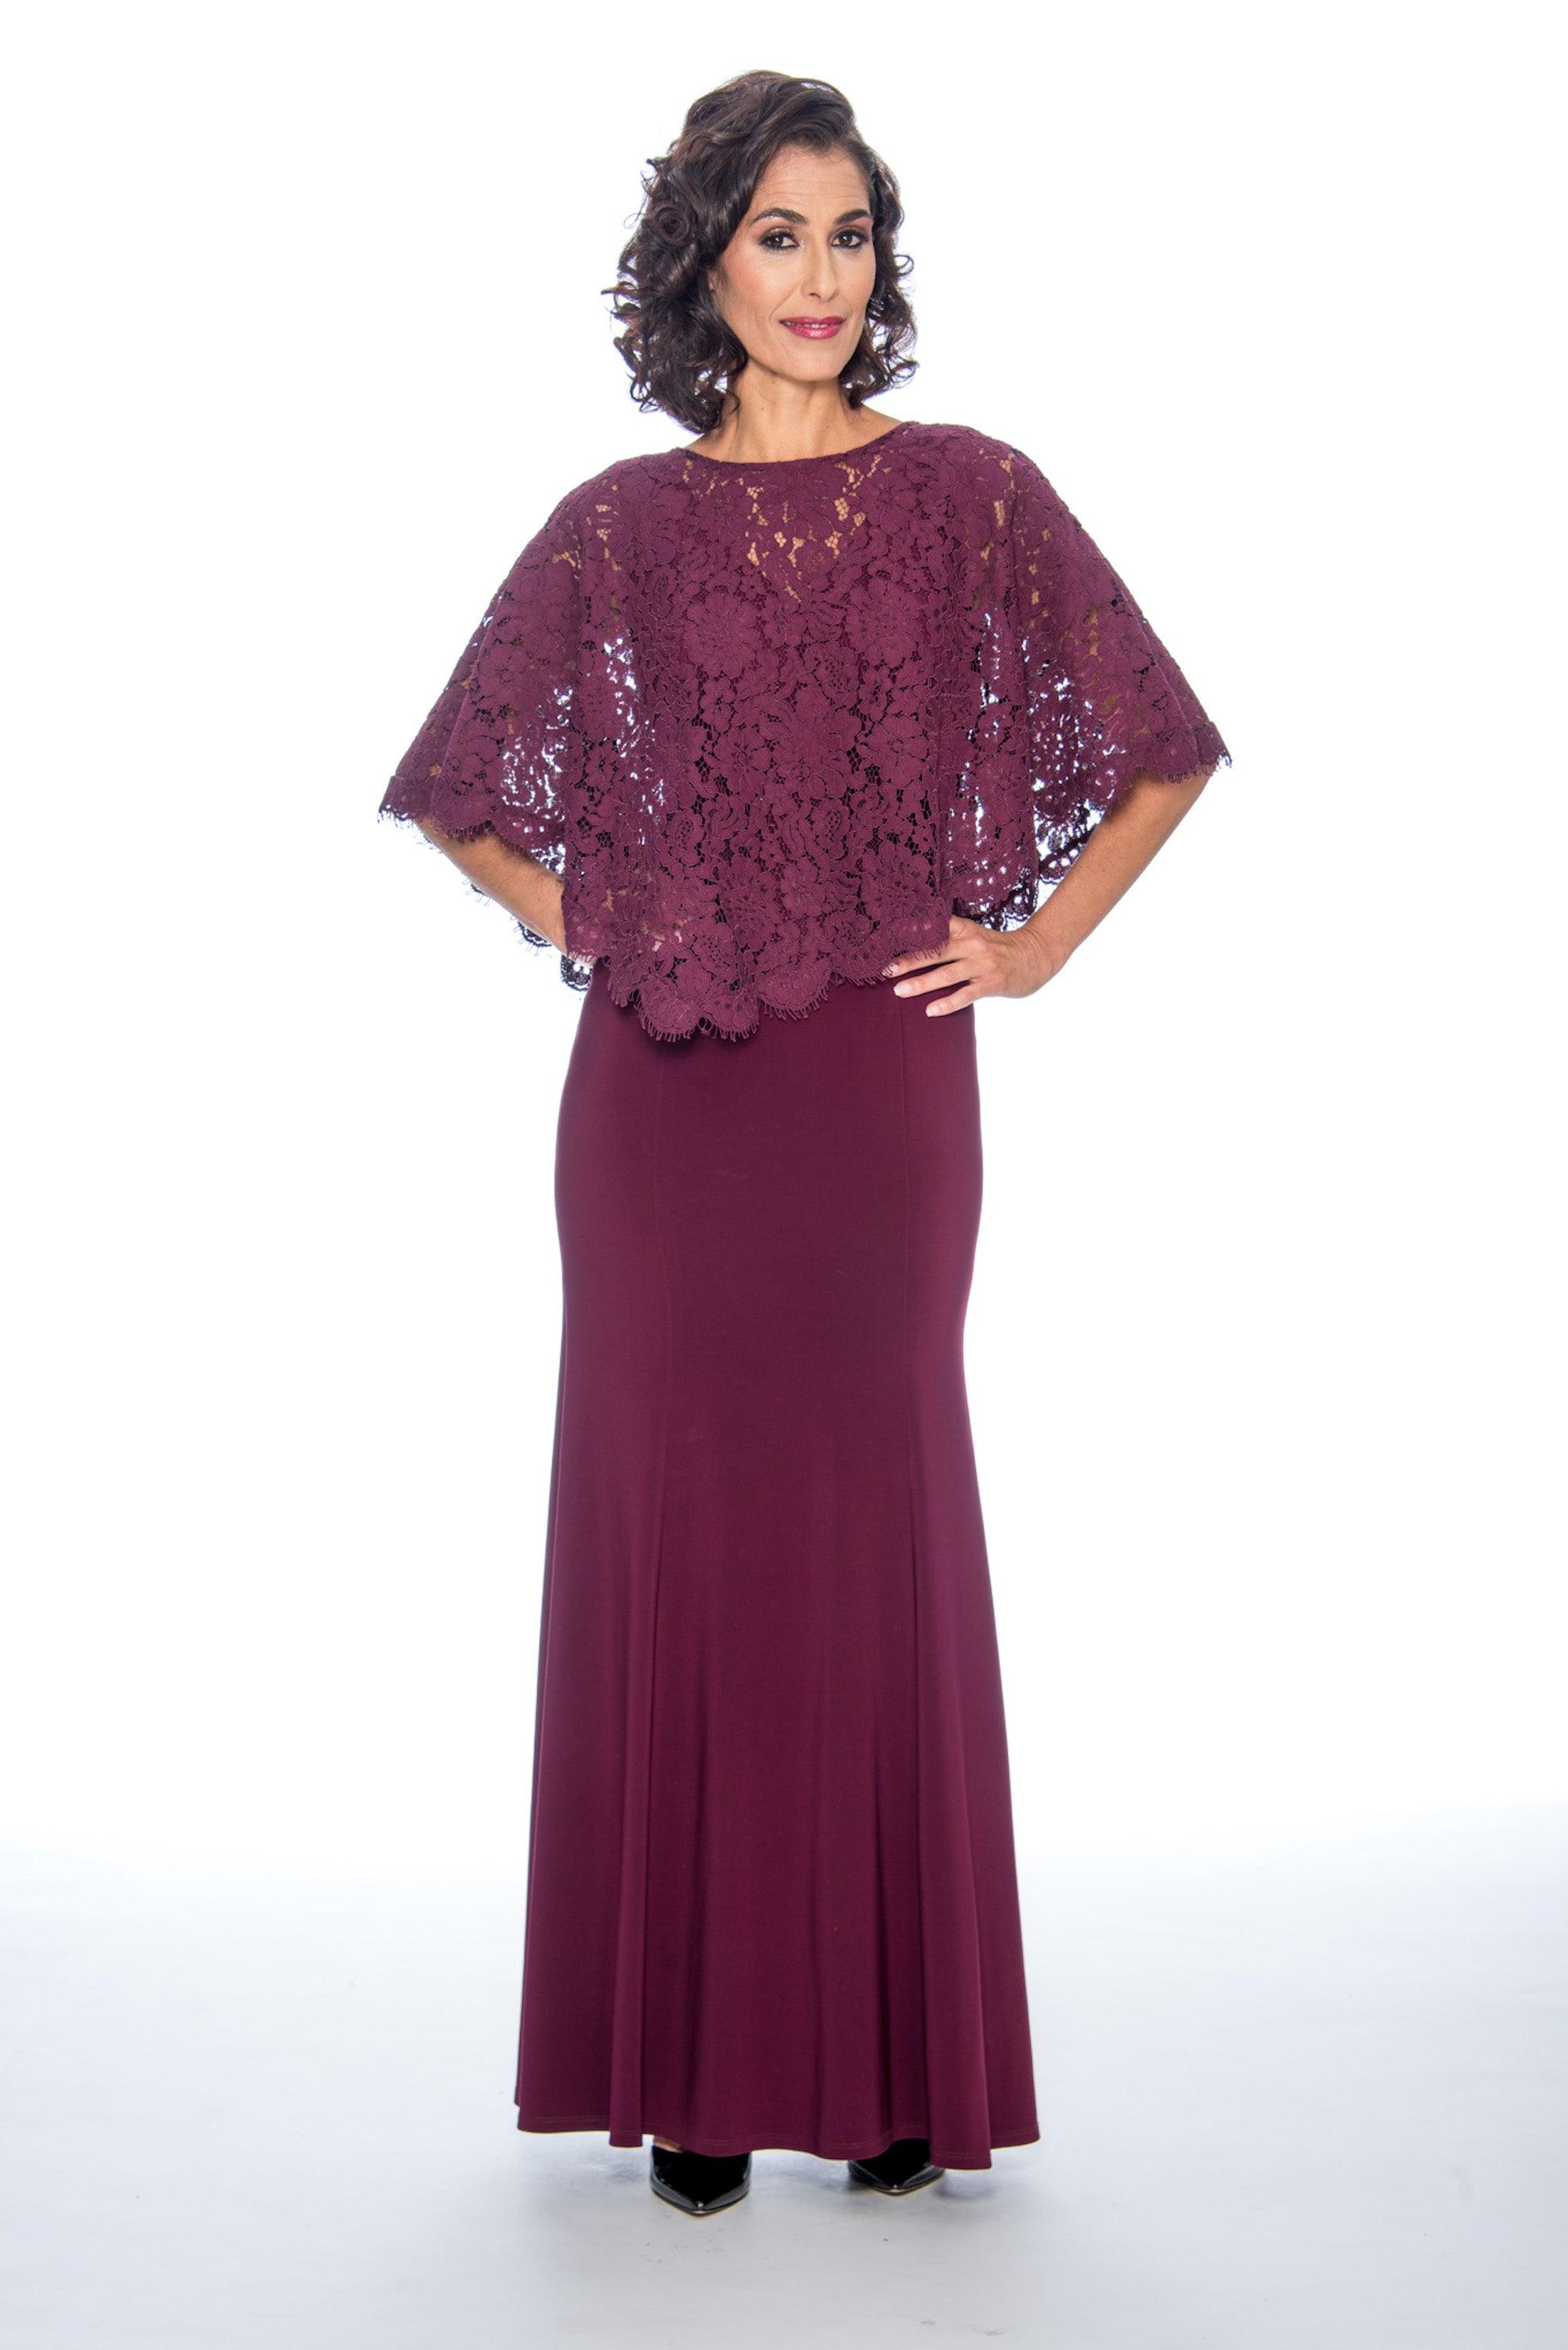 Decode 1.8 Cape Sleeve Long Formal Dress Plus Size - The Dress Outlet Decode 1.8